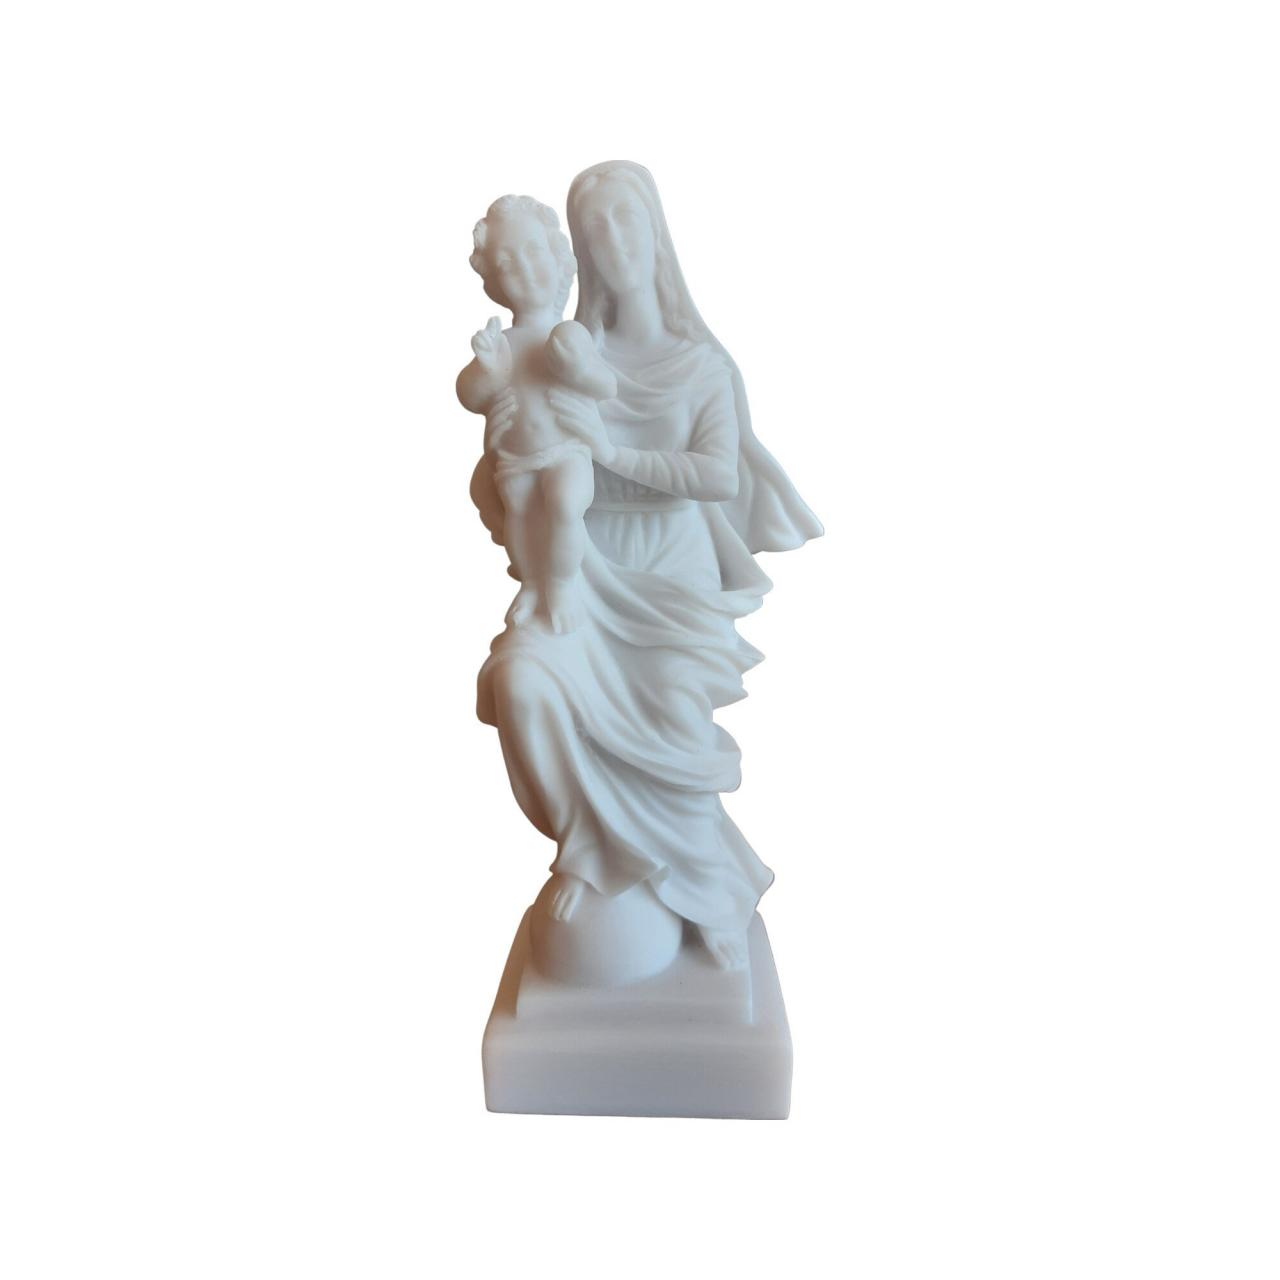 Mary Mother Holding Baby Jesus Sculpture Handmade Alabaster Christian Orthodox Religious Figurine Statue 20cm